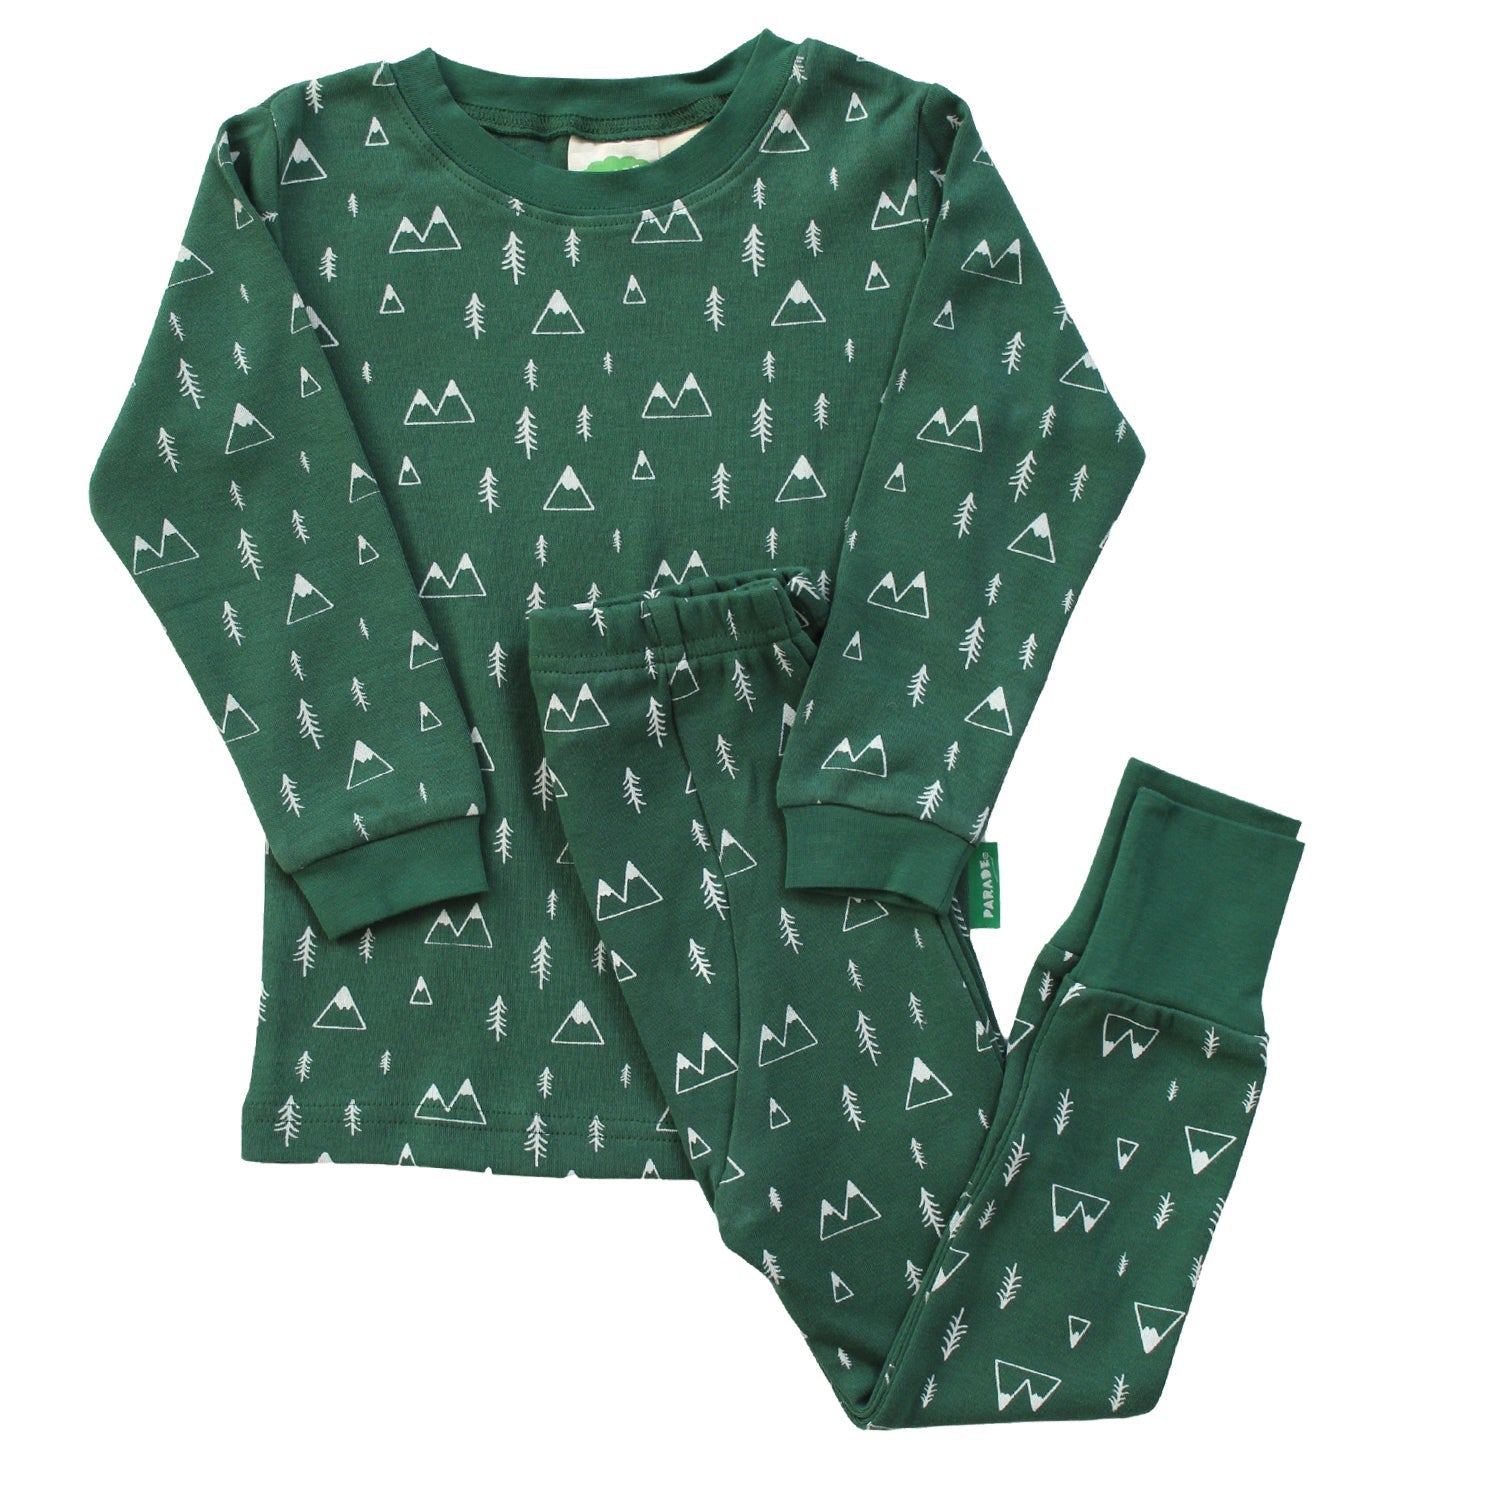 Yay! Organic clothing brand that made holiday pajamas for the